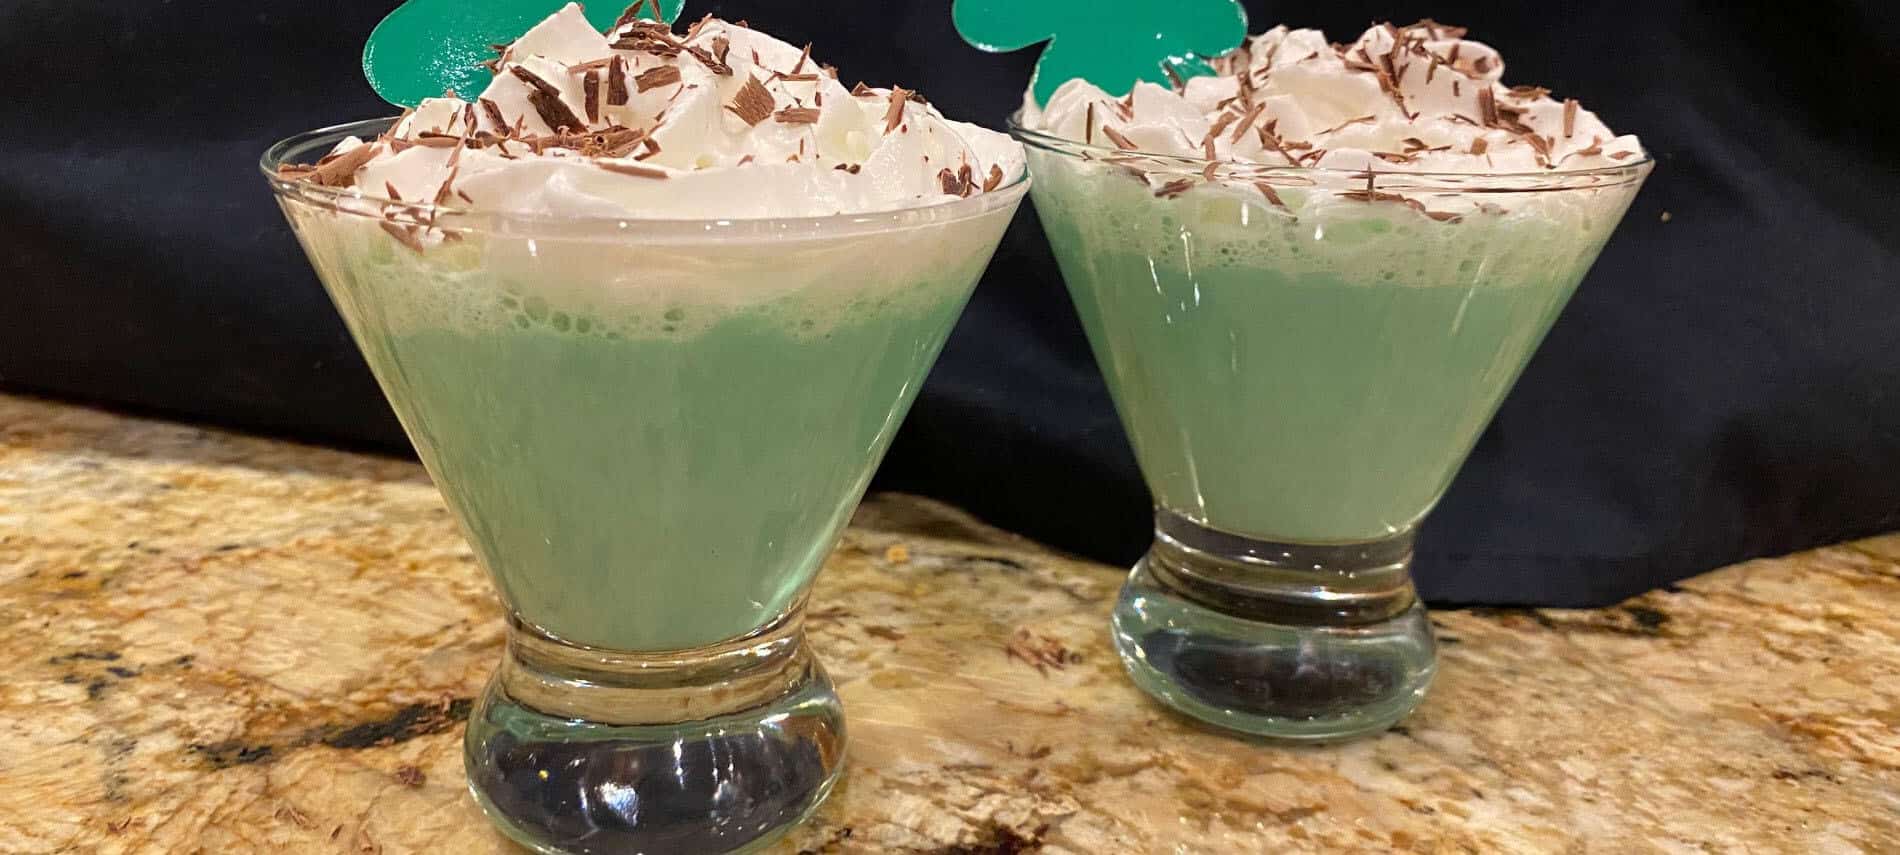 Green Martini with whipped cream topping and chocolate shavings in a clear martini glass